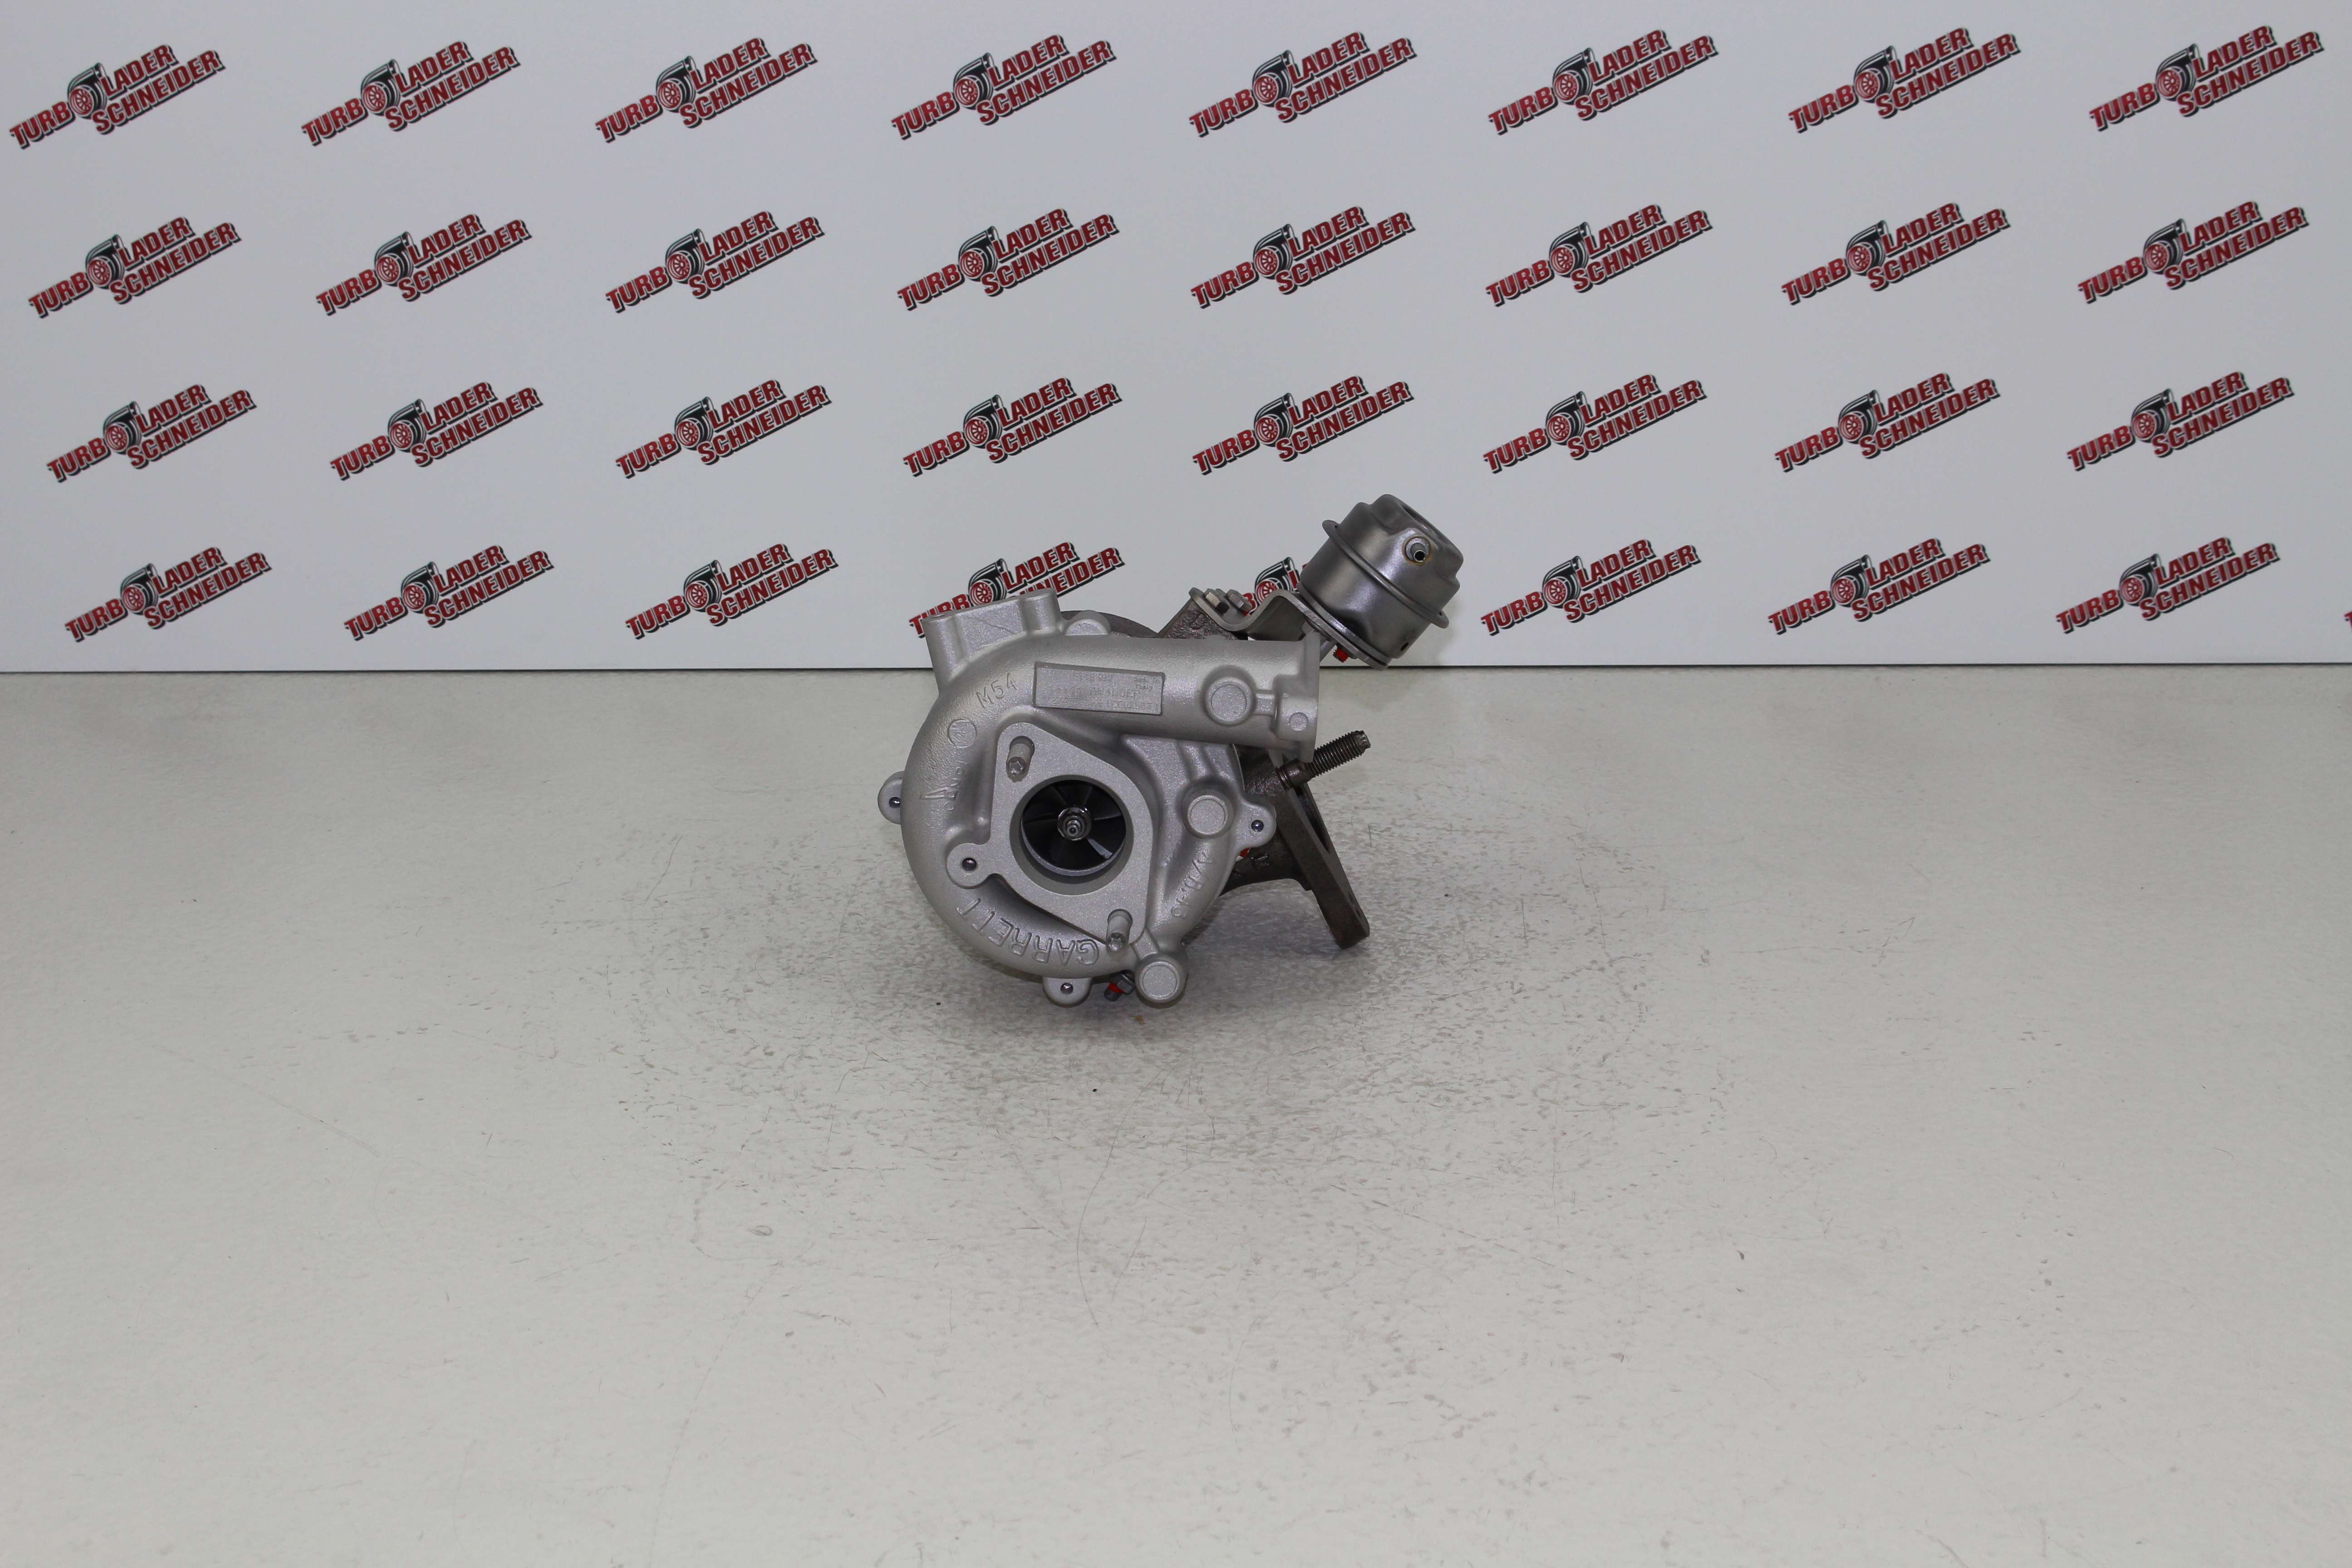 Turbolader Nissan 2.2 dCi/Di 84-100 Kw